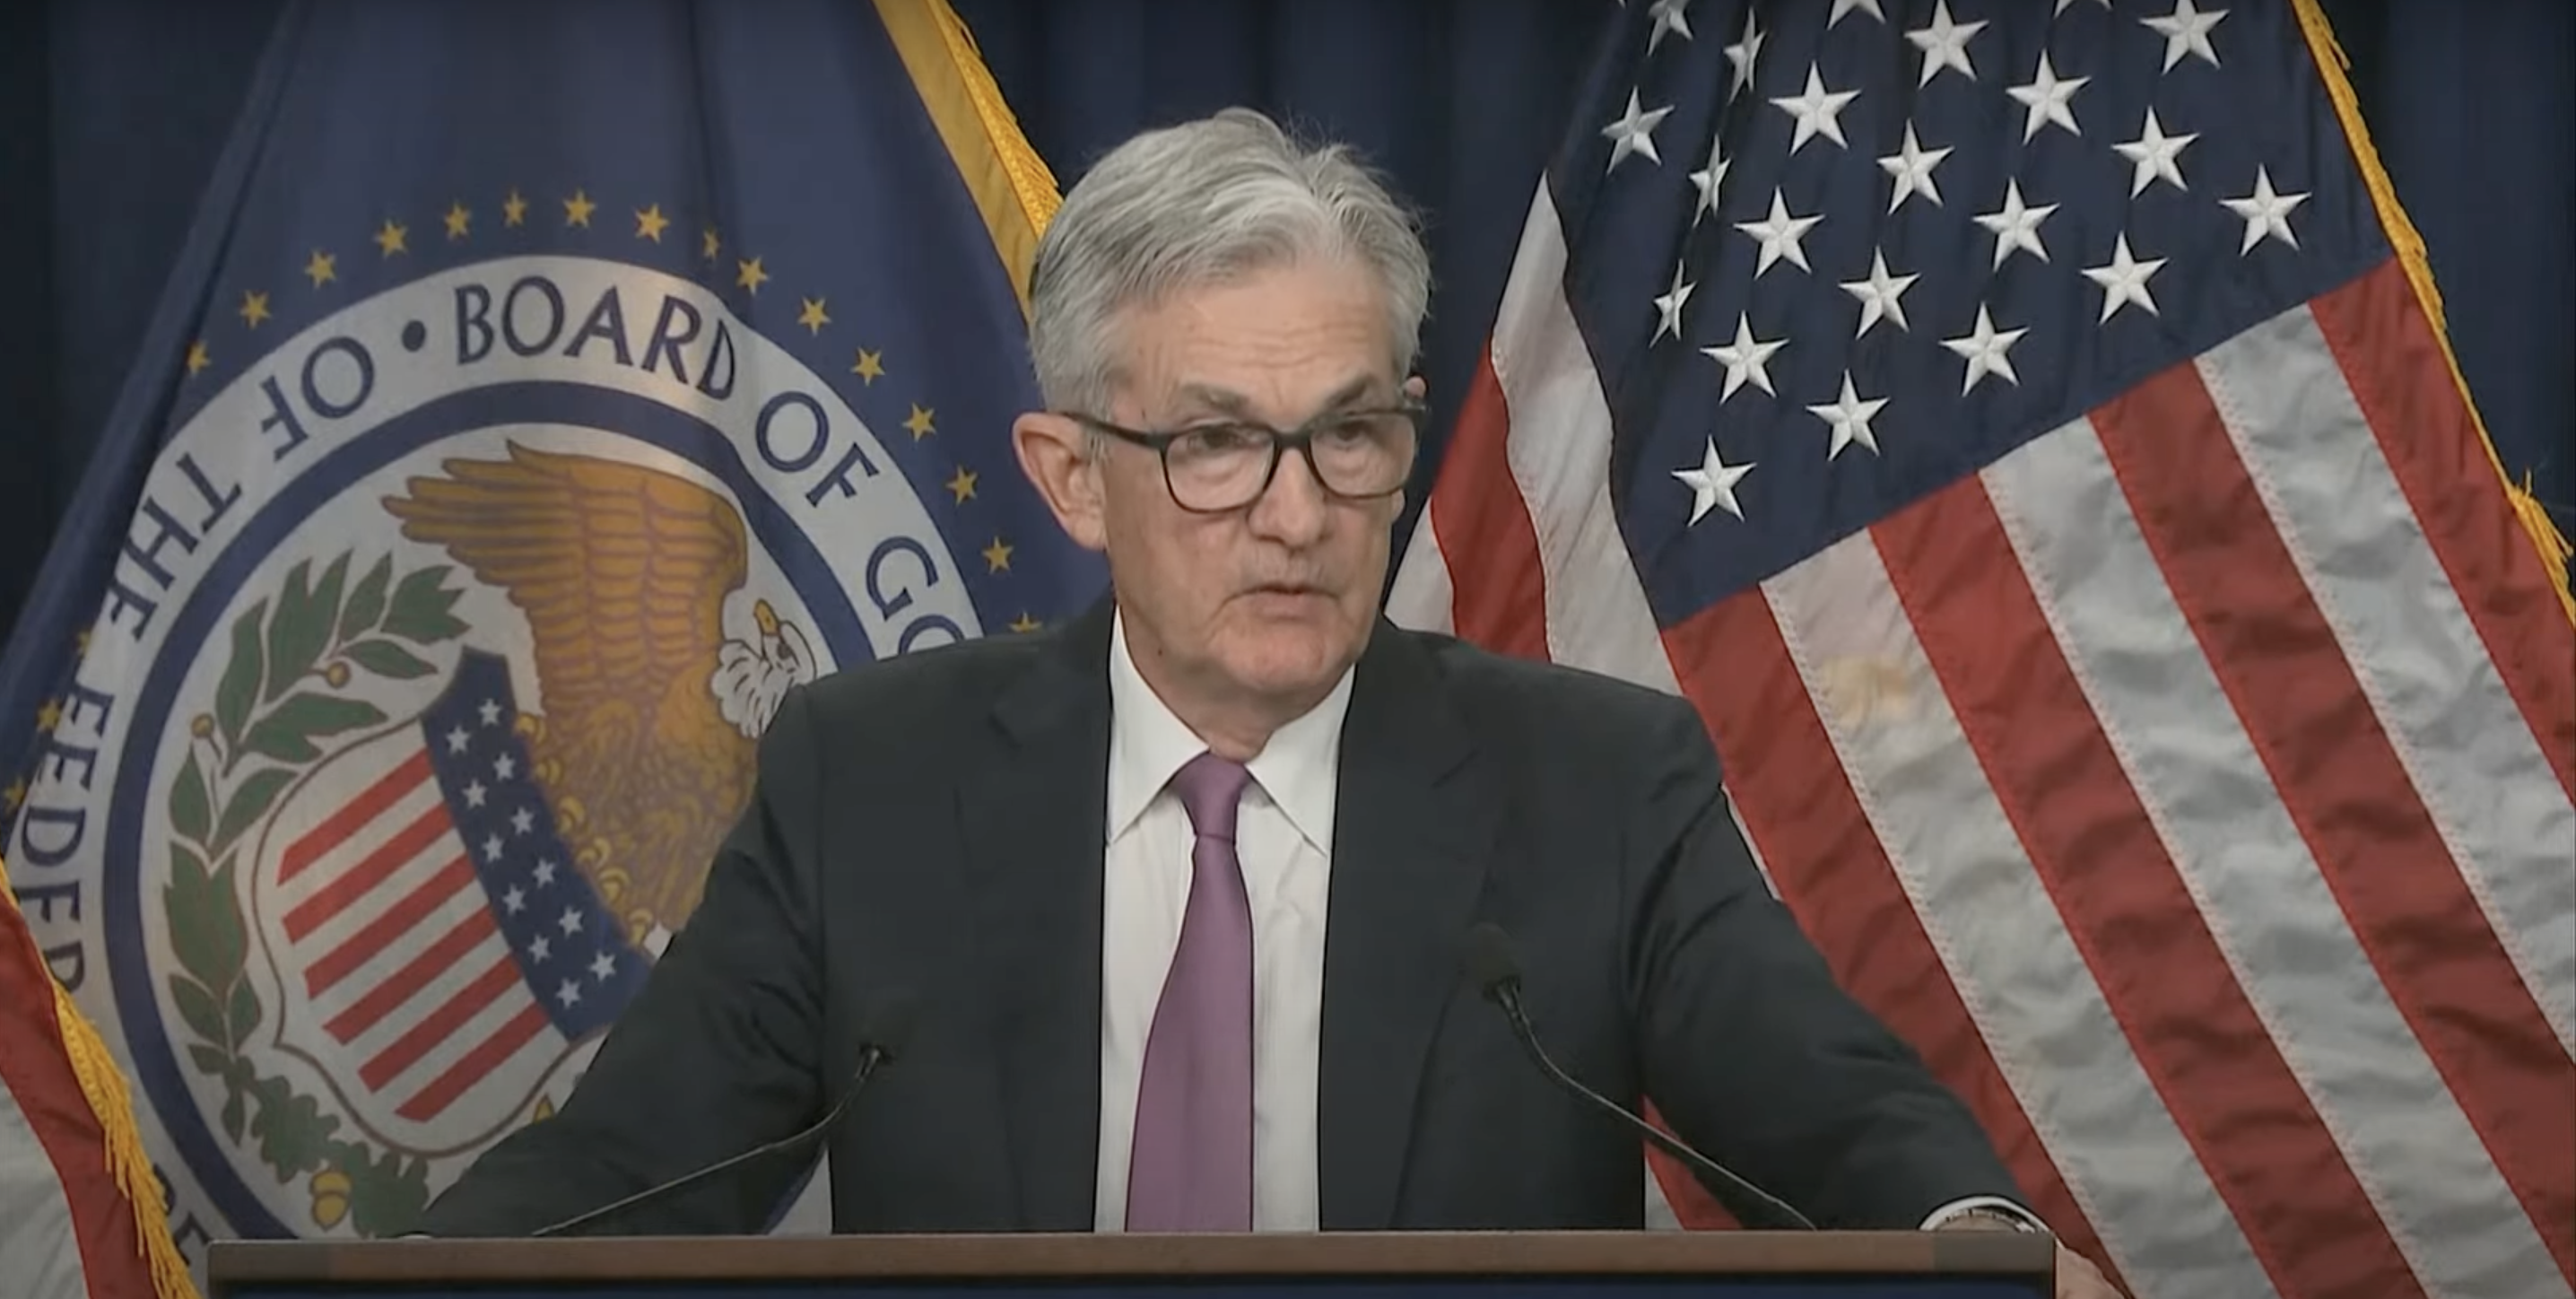 Bitcoin price rises after Federal Reserve rate hike of 0.75 percent
